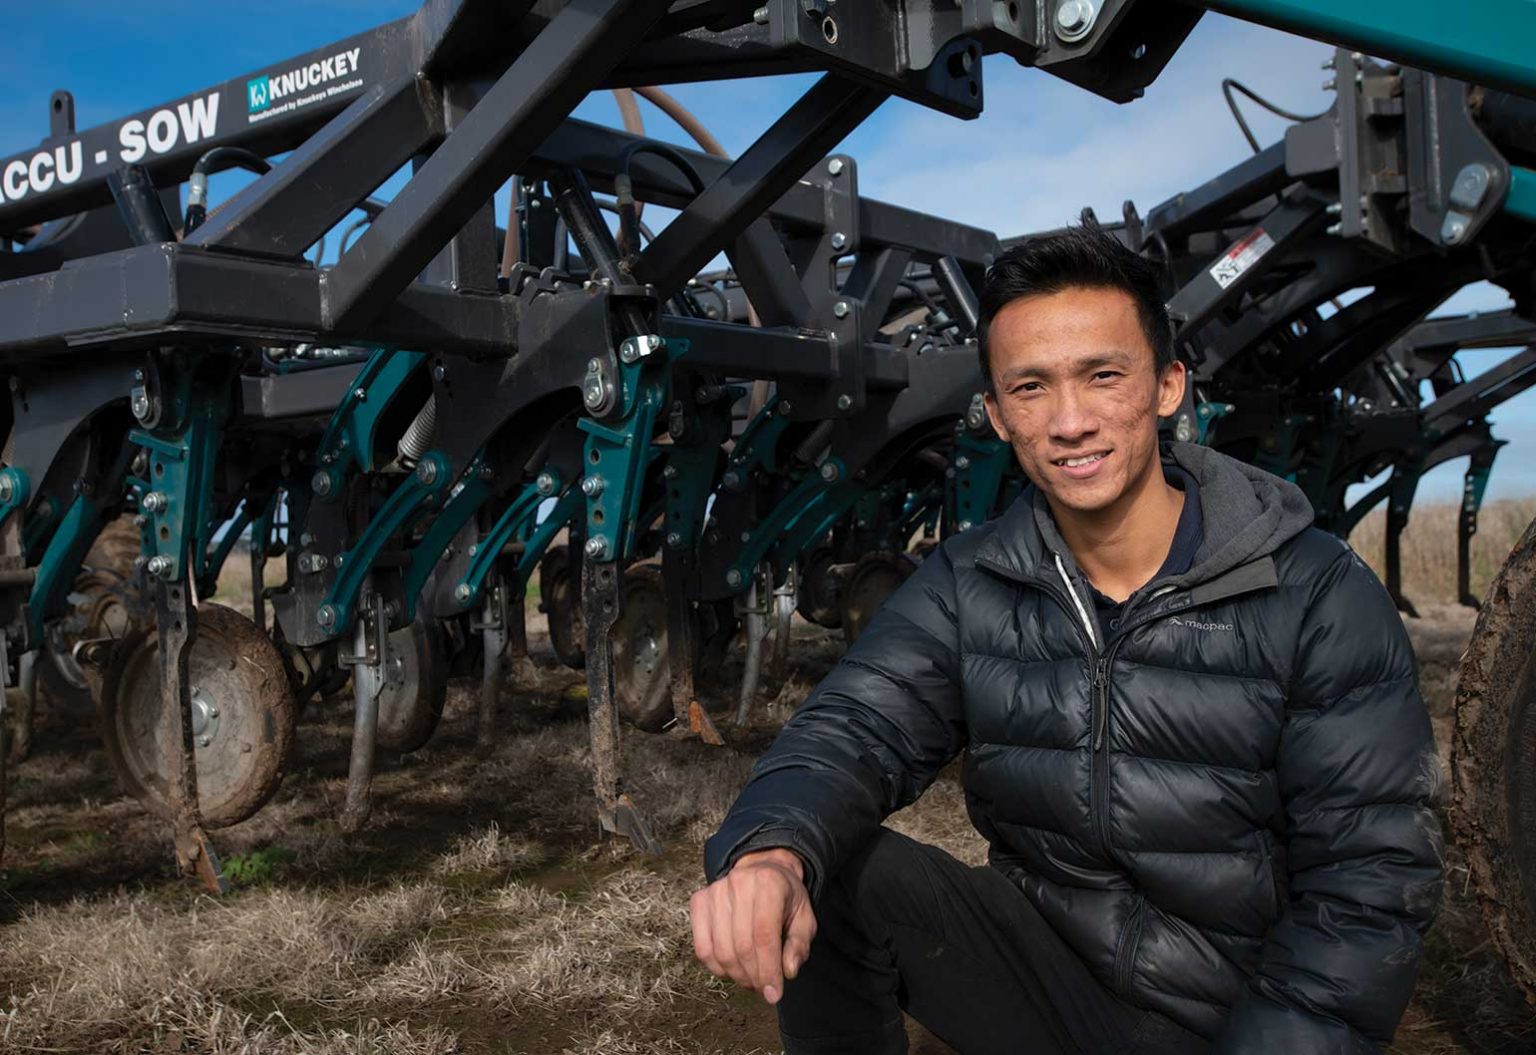 Jason Chan is shaking up the world of agricultural machinery